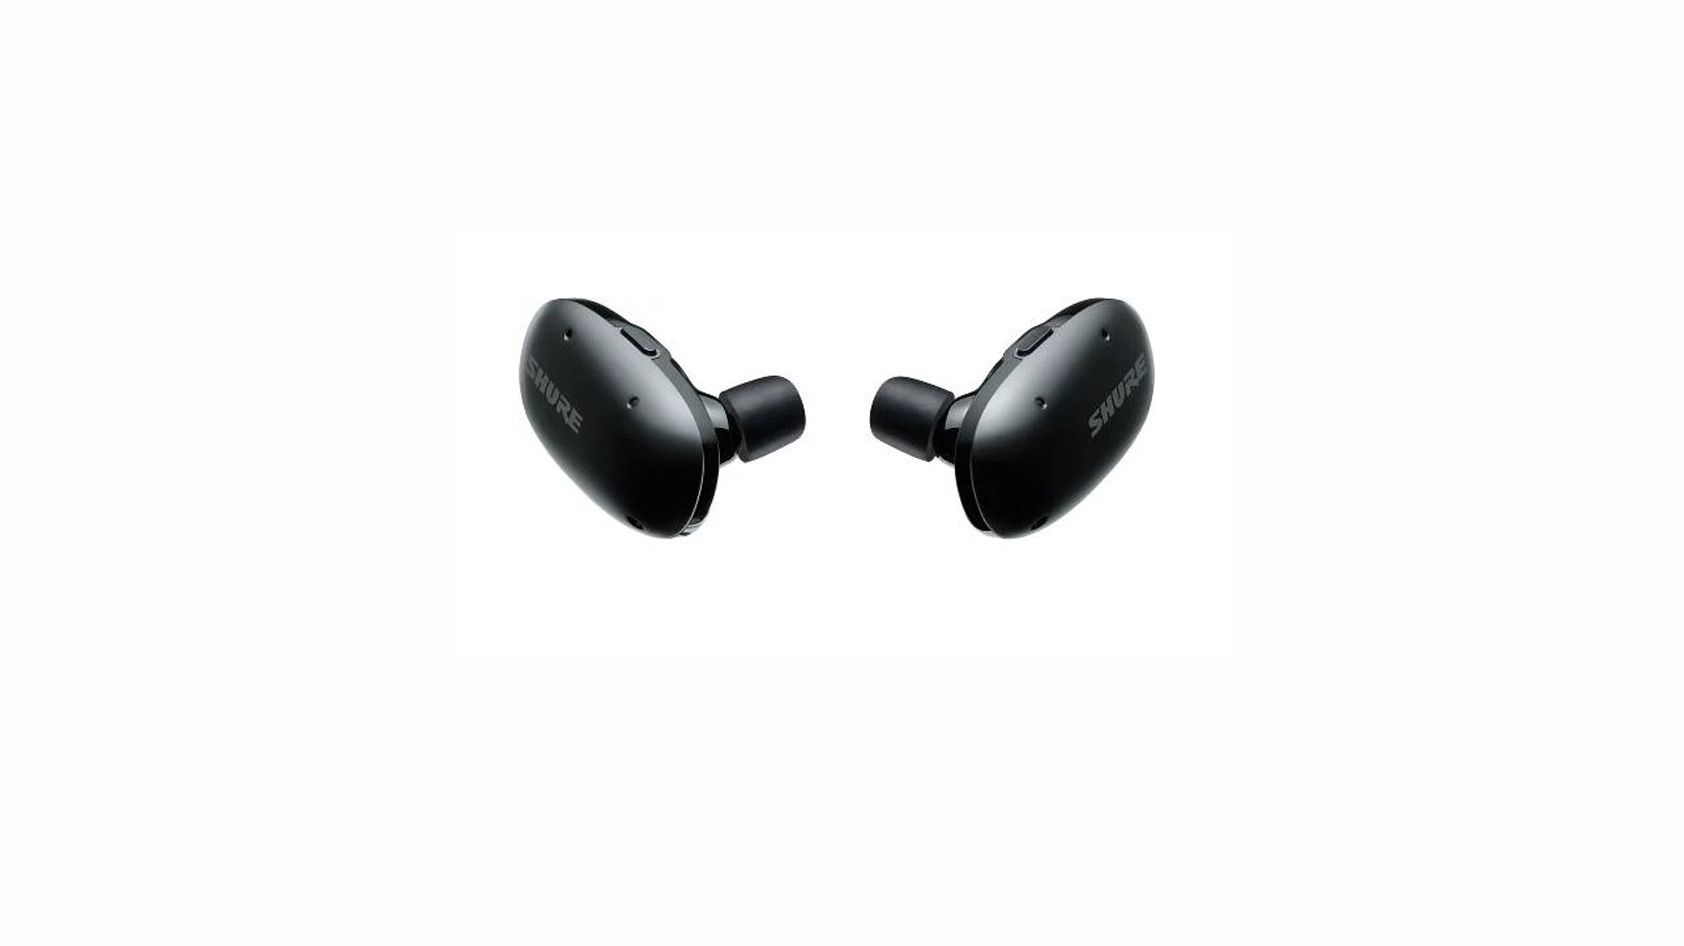 The Shure AONIC Free wireless earbuds suspended against a white background.